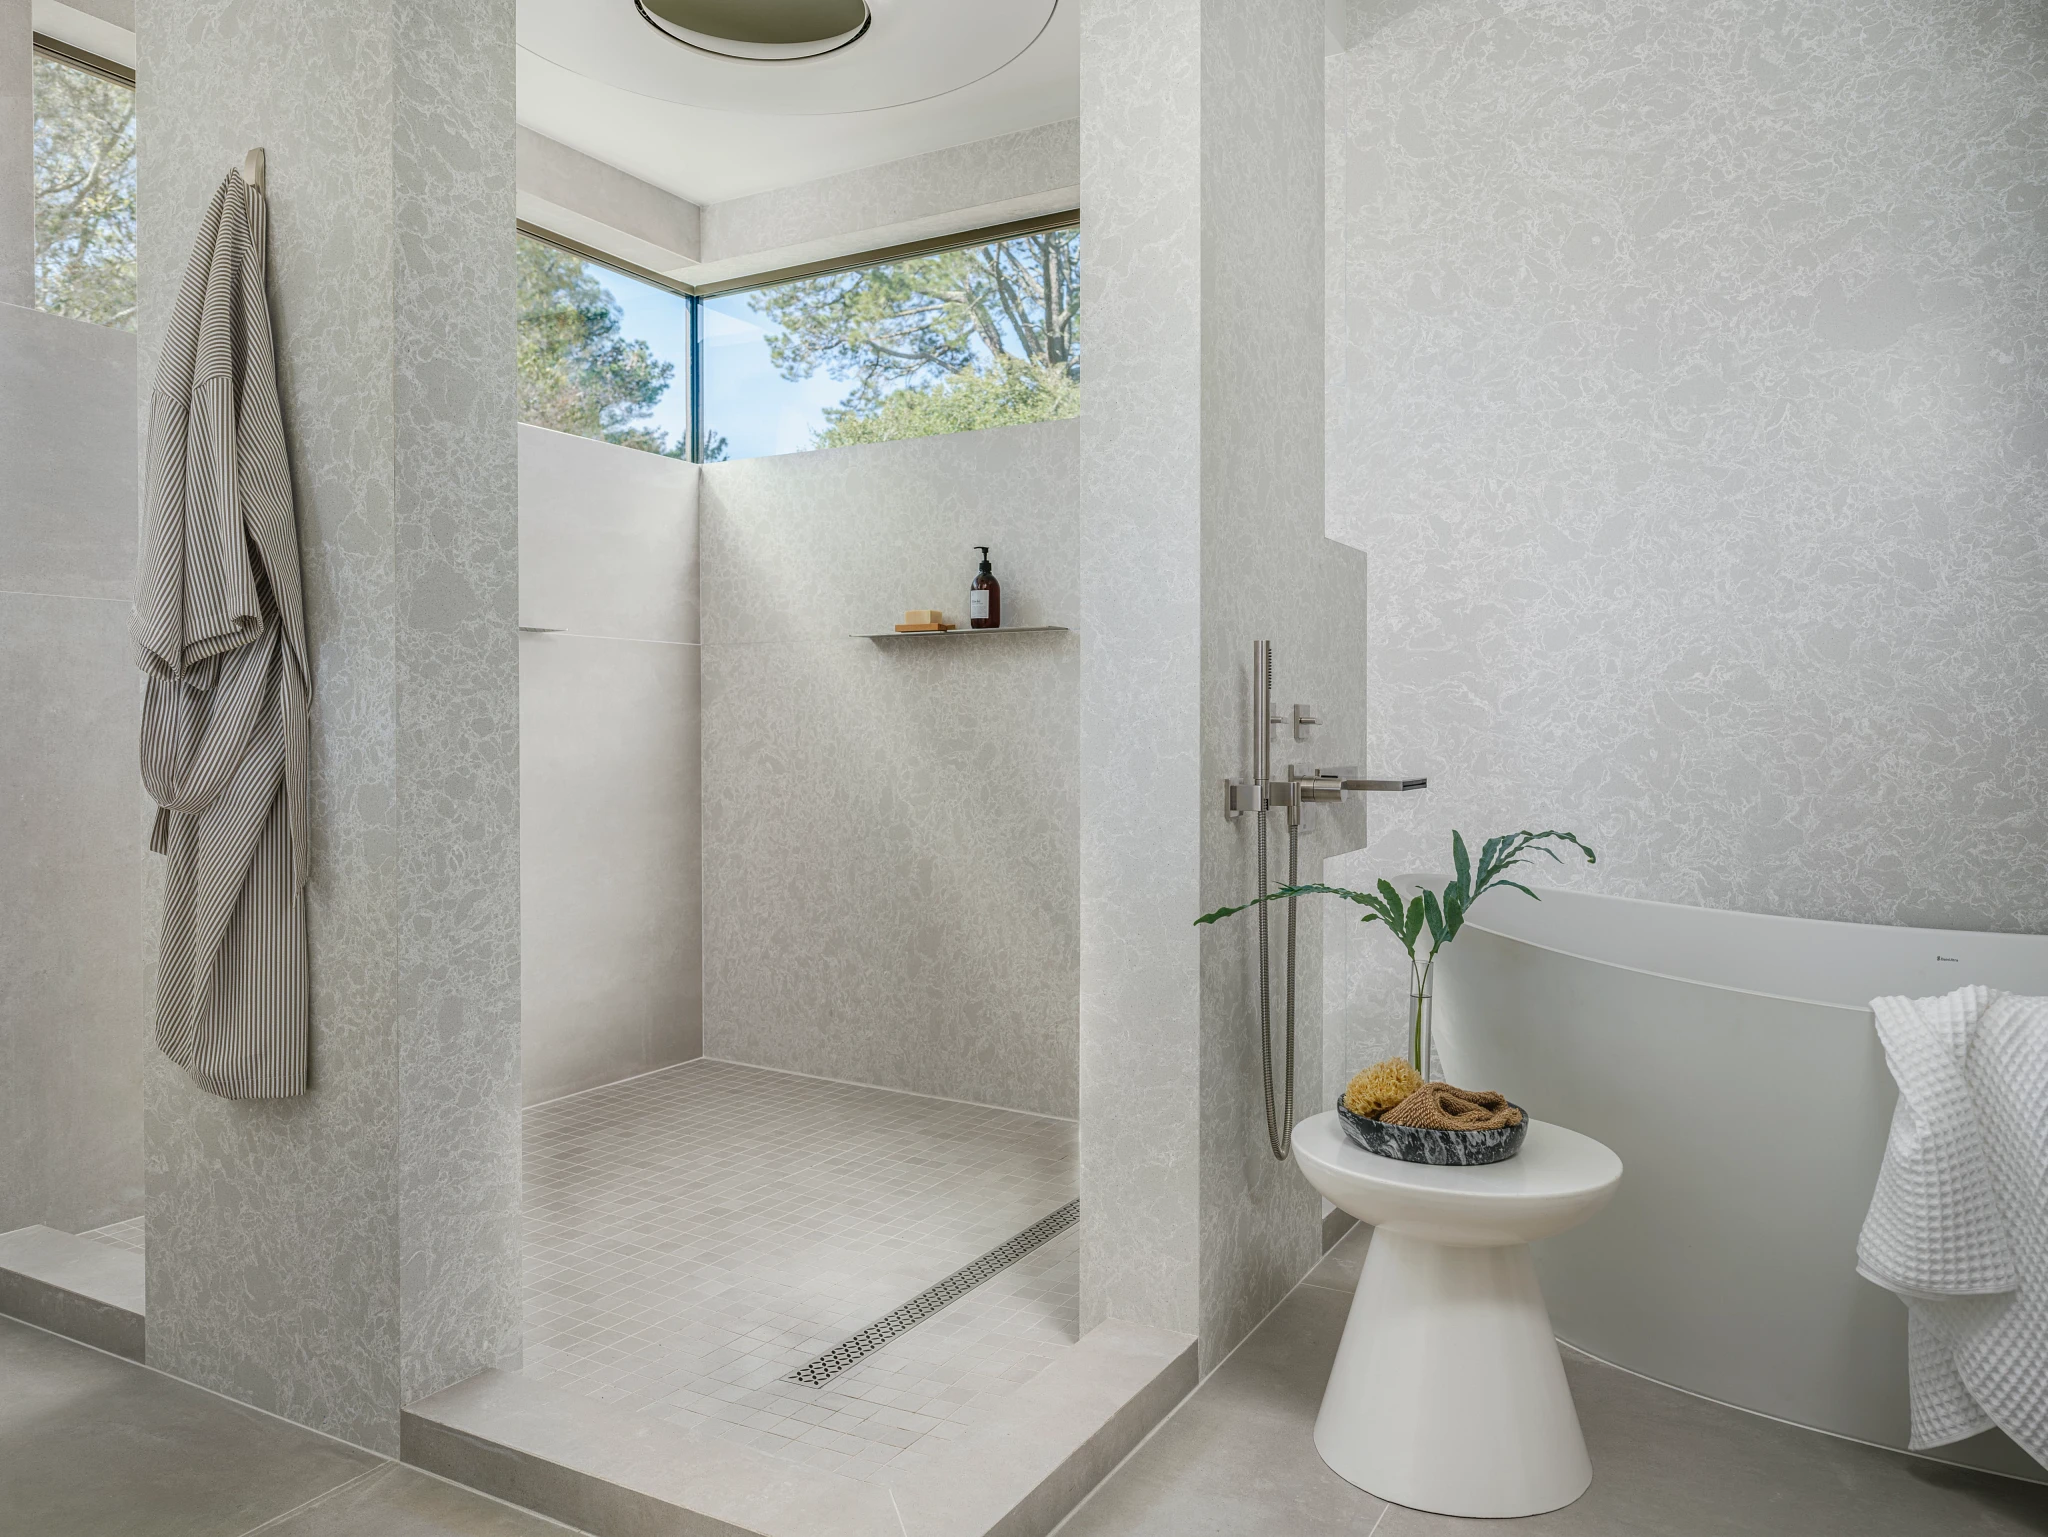 a natural and clean bathroom with a large, open shower with windows, a spot to hang a rob, and made from Cambria quartz Big Sur Mist with complementary Big Sur Mist walls.